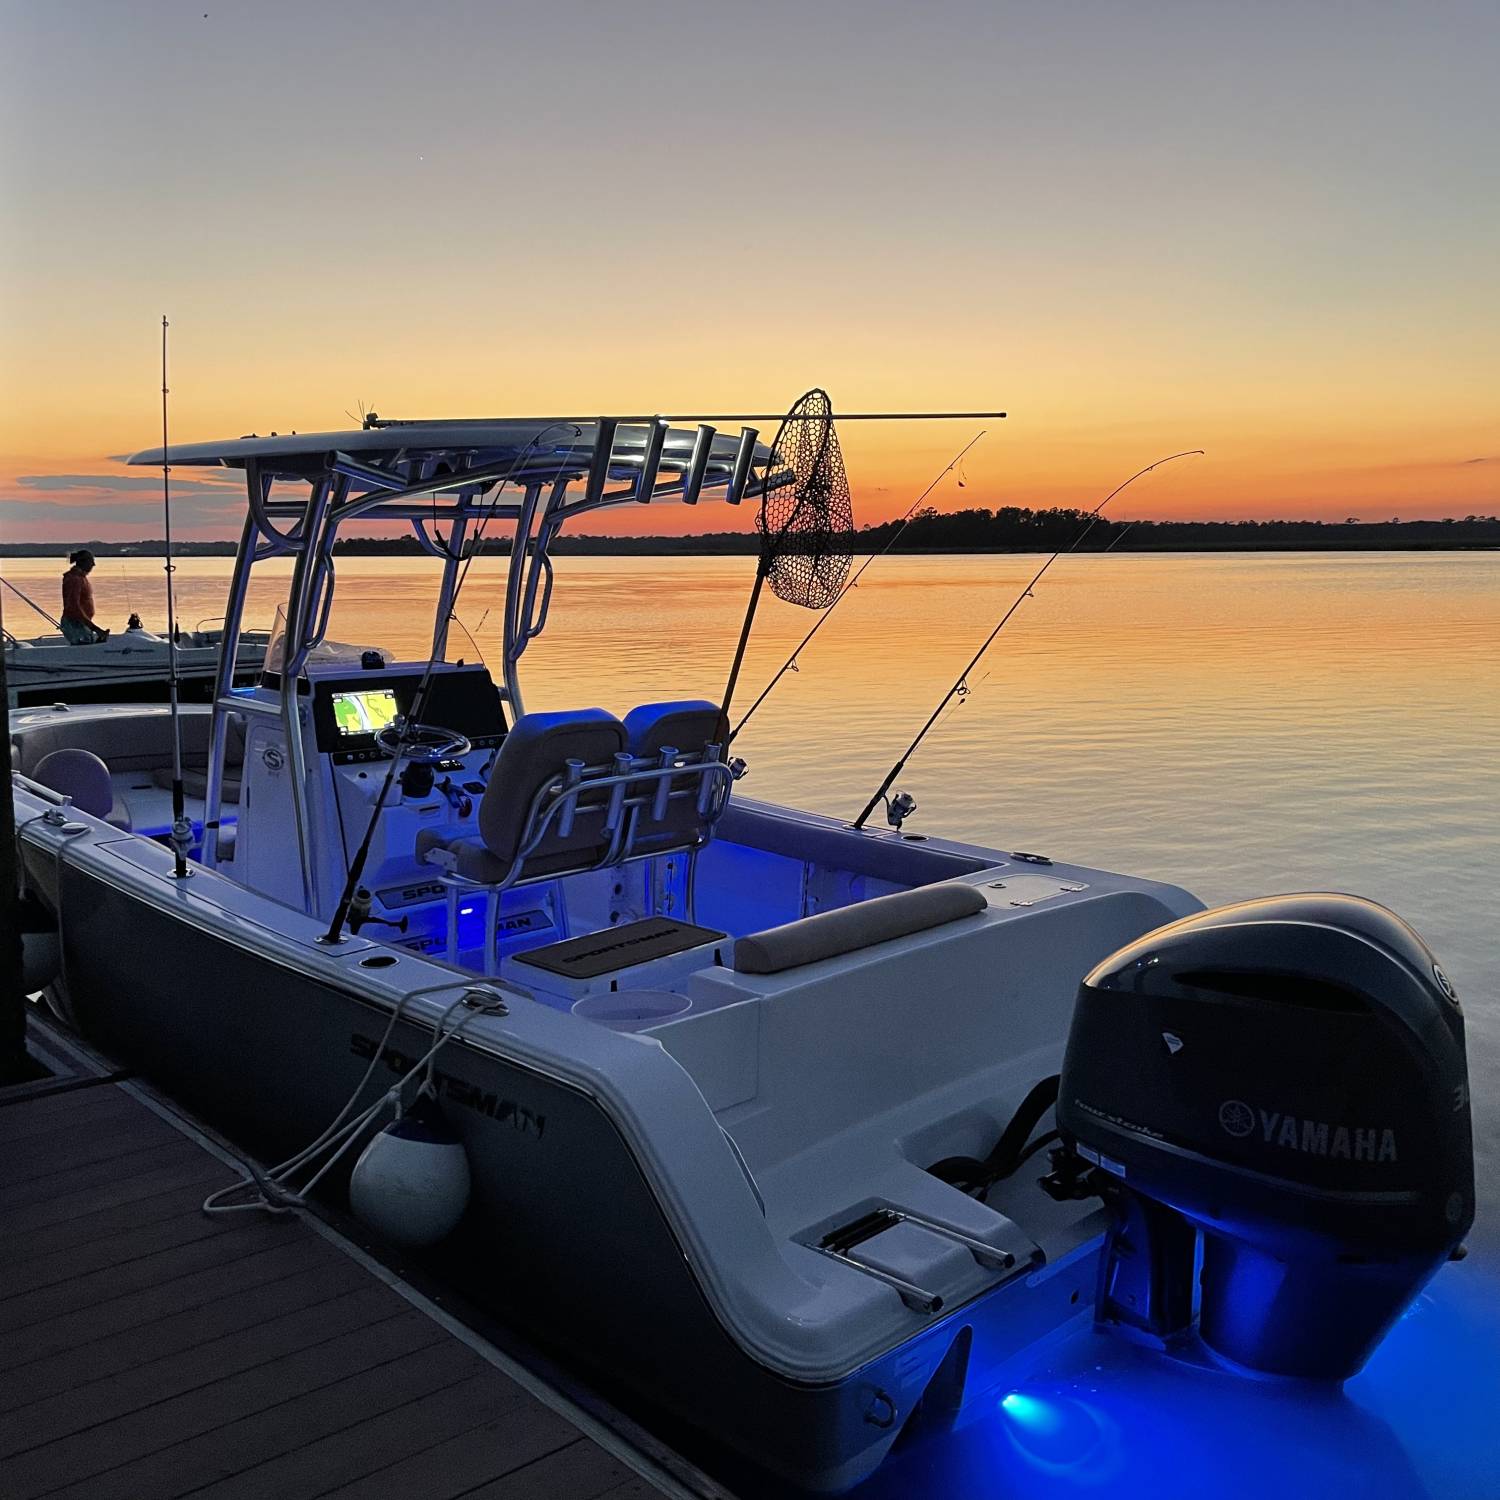 Title: Sunset cruise - On board their Sportsman Open 242 Center Console - Location: Kiawah island. Participating in the Photo Contest #SportsmanMarch